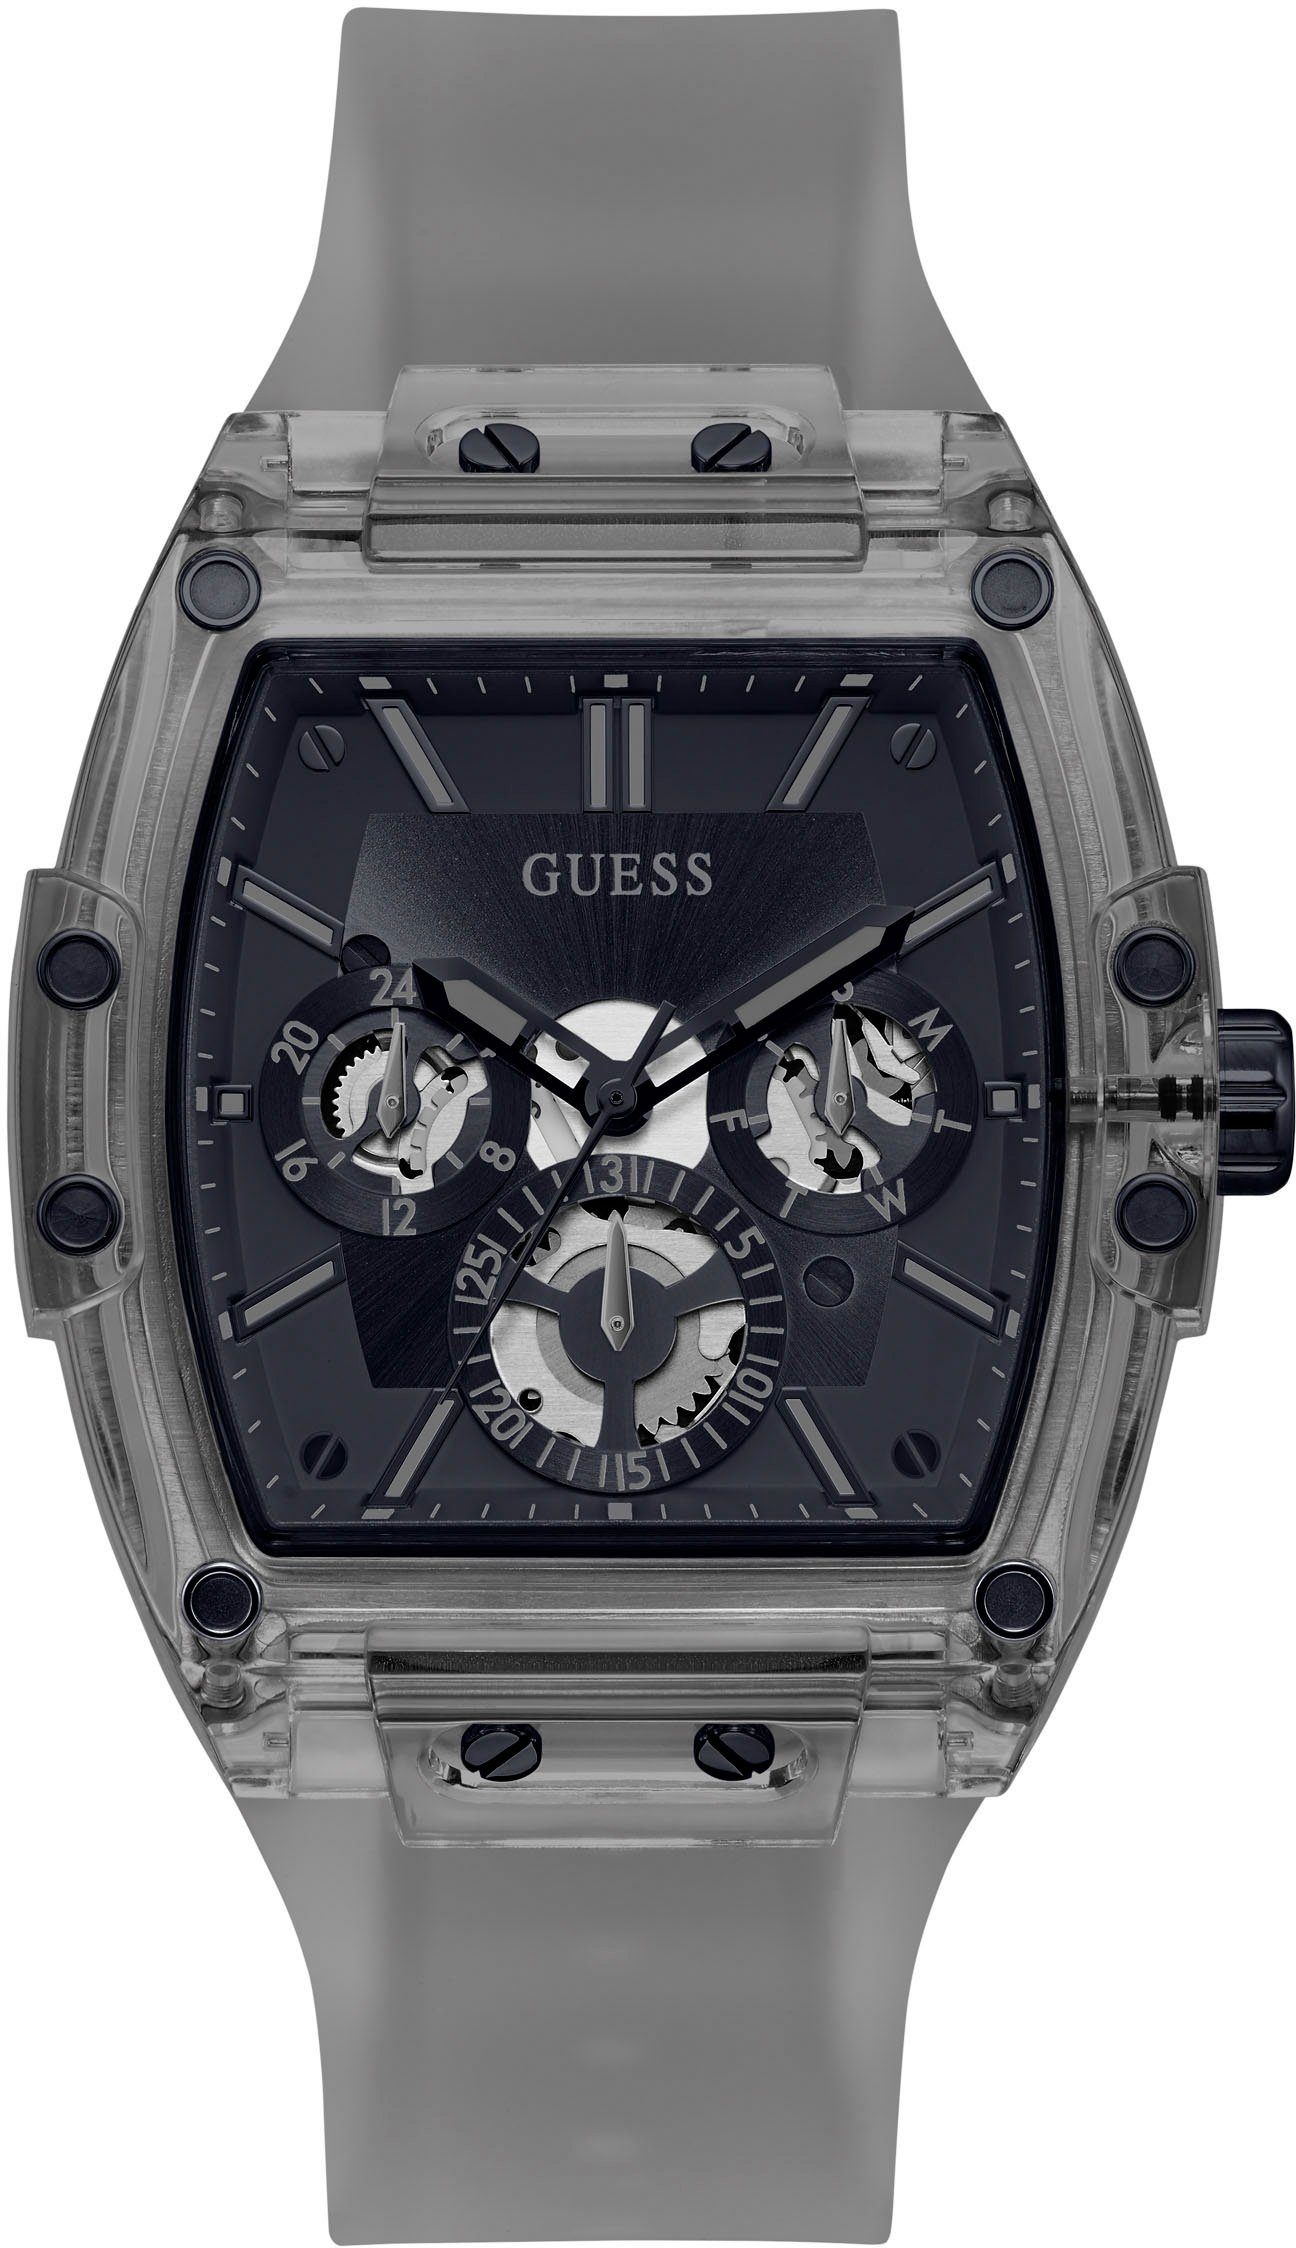 Multifunktionsuhr Guess GW0203G9